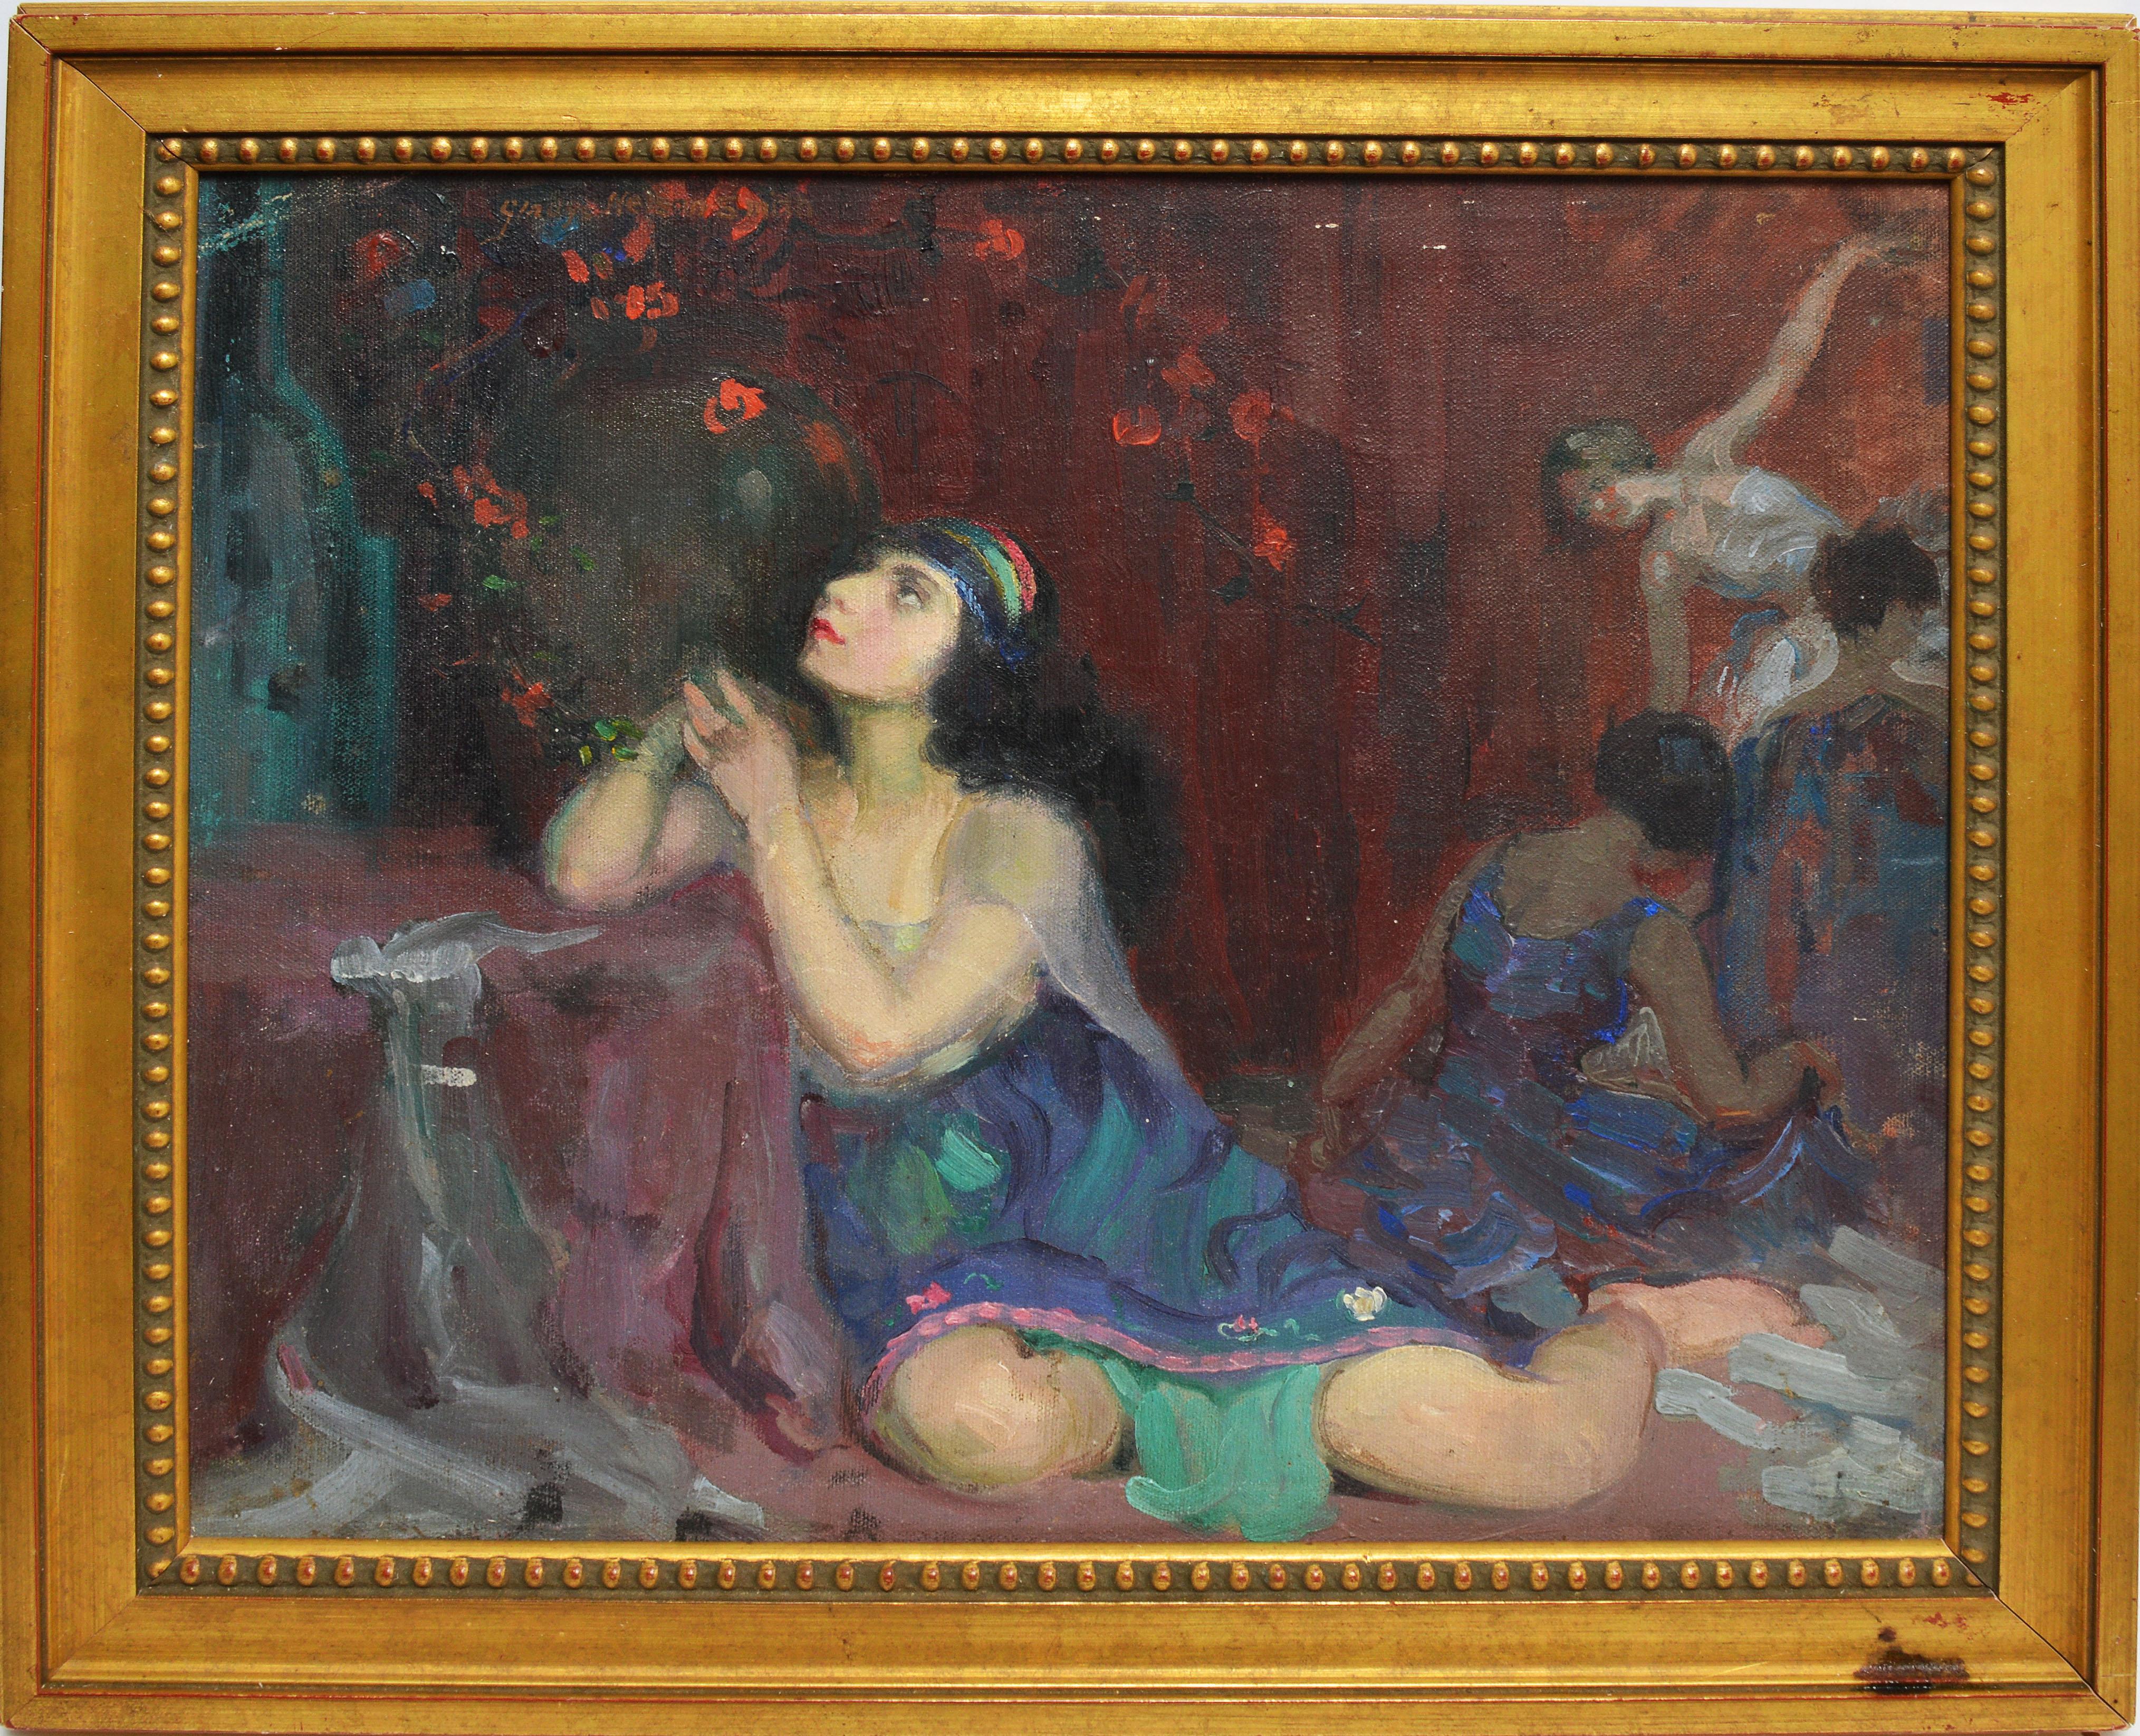 Impressionist view of women by Gladys Nelson Smith  (1890 - 1980).  Oil on board, circa 1930.  Signed upper left.  Displayed in a giltwood frame.  Image size, 16"L x 14"H, overall 19"L x 17"H.